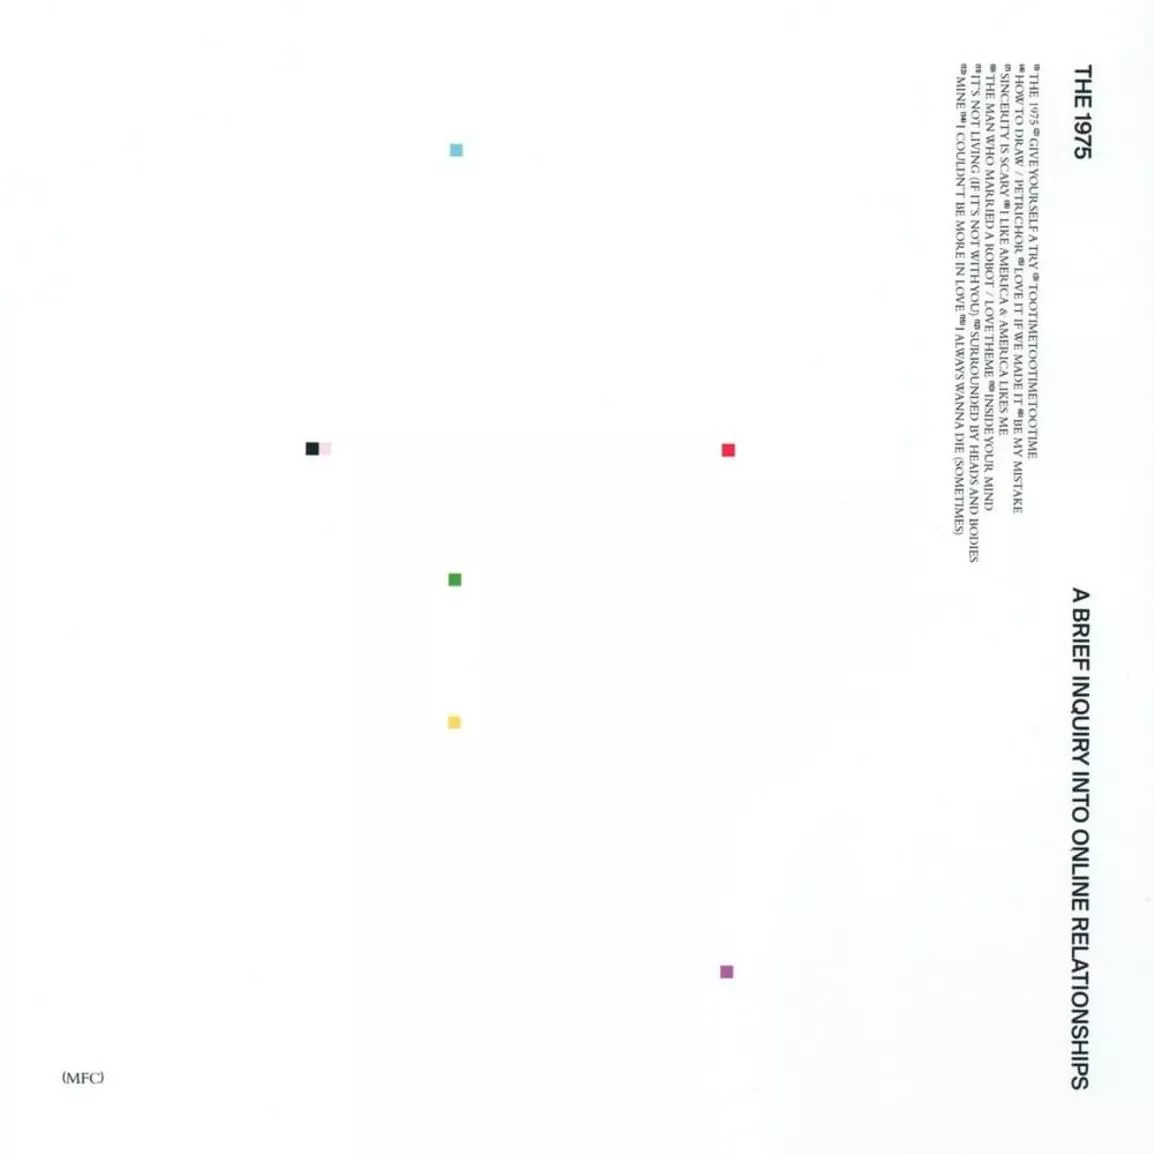 A Brief Inquiry Into Online Relationship - The 1975